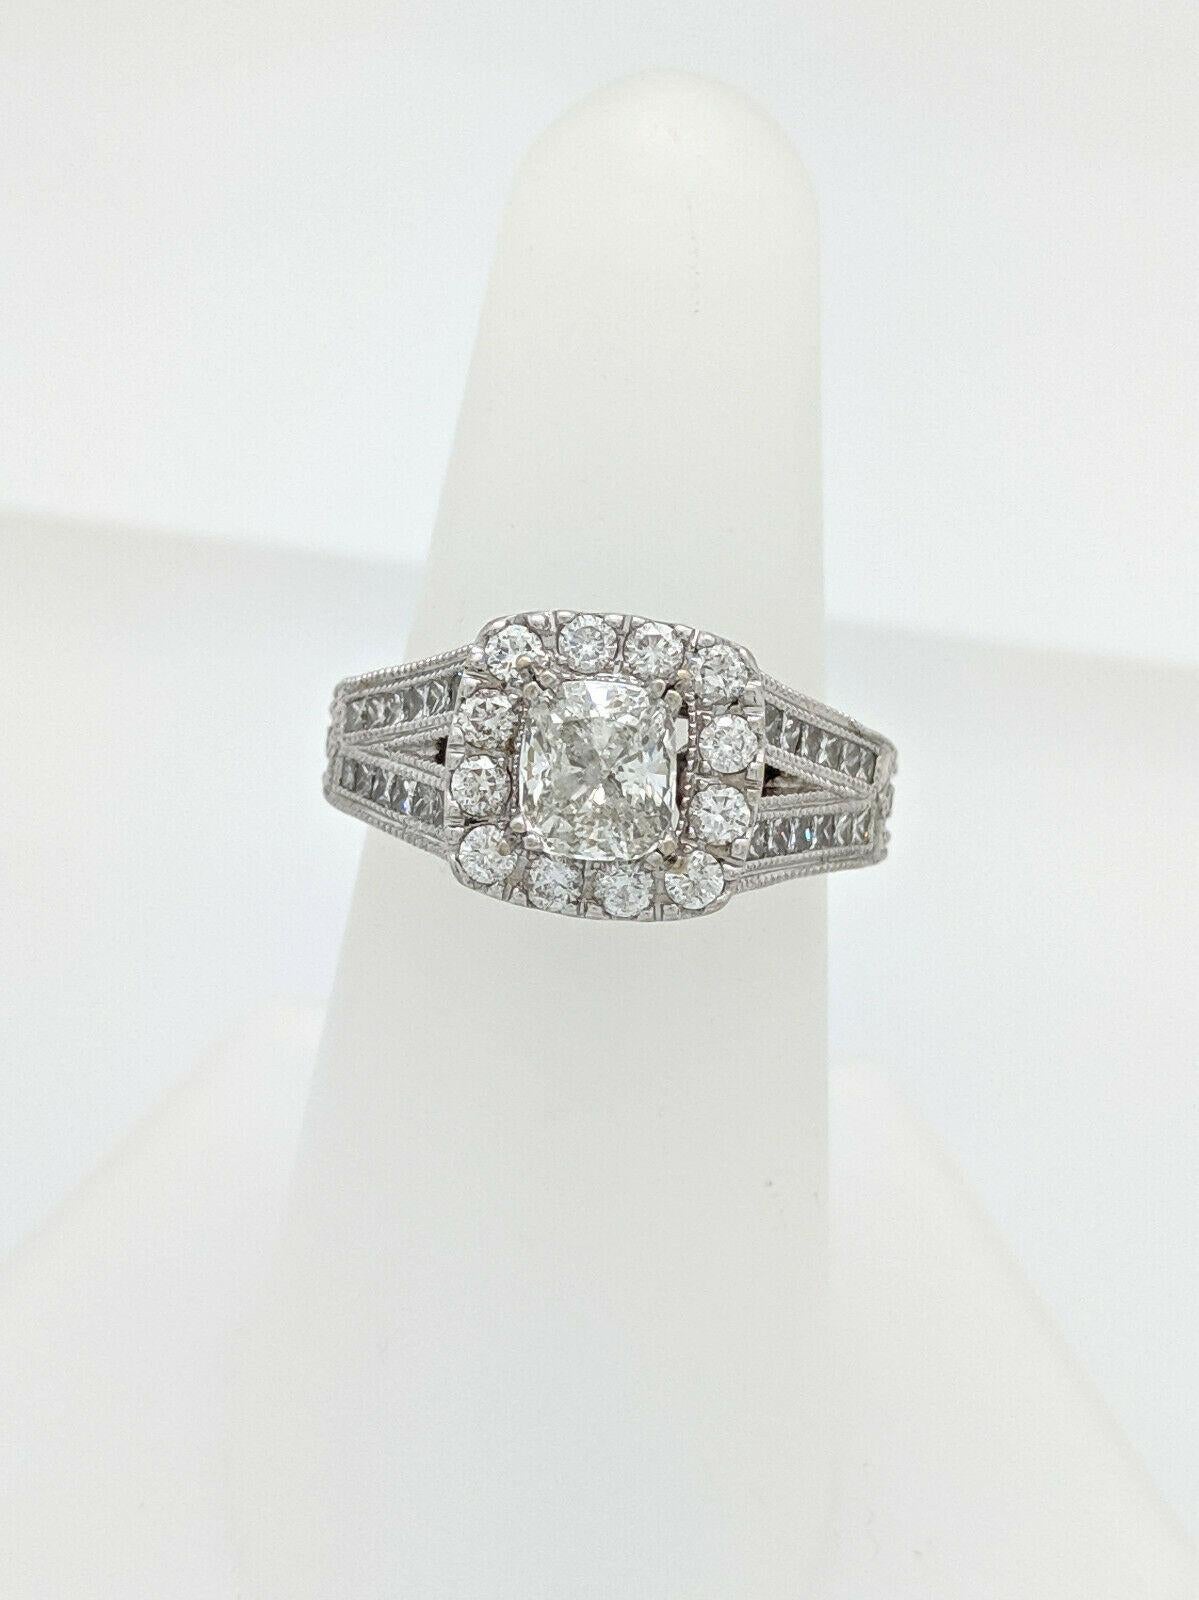 You are viewing a beautiful diamond engagement ring by Neil Lane from the vintage hollywood collection. 
The ring features a 1ct cushion cut diamond as the center which is  beautifully displayed in a 14k white gold setting with round and princess